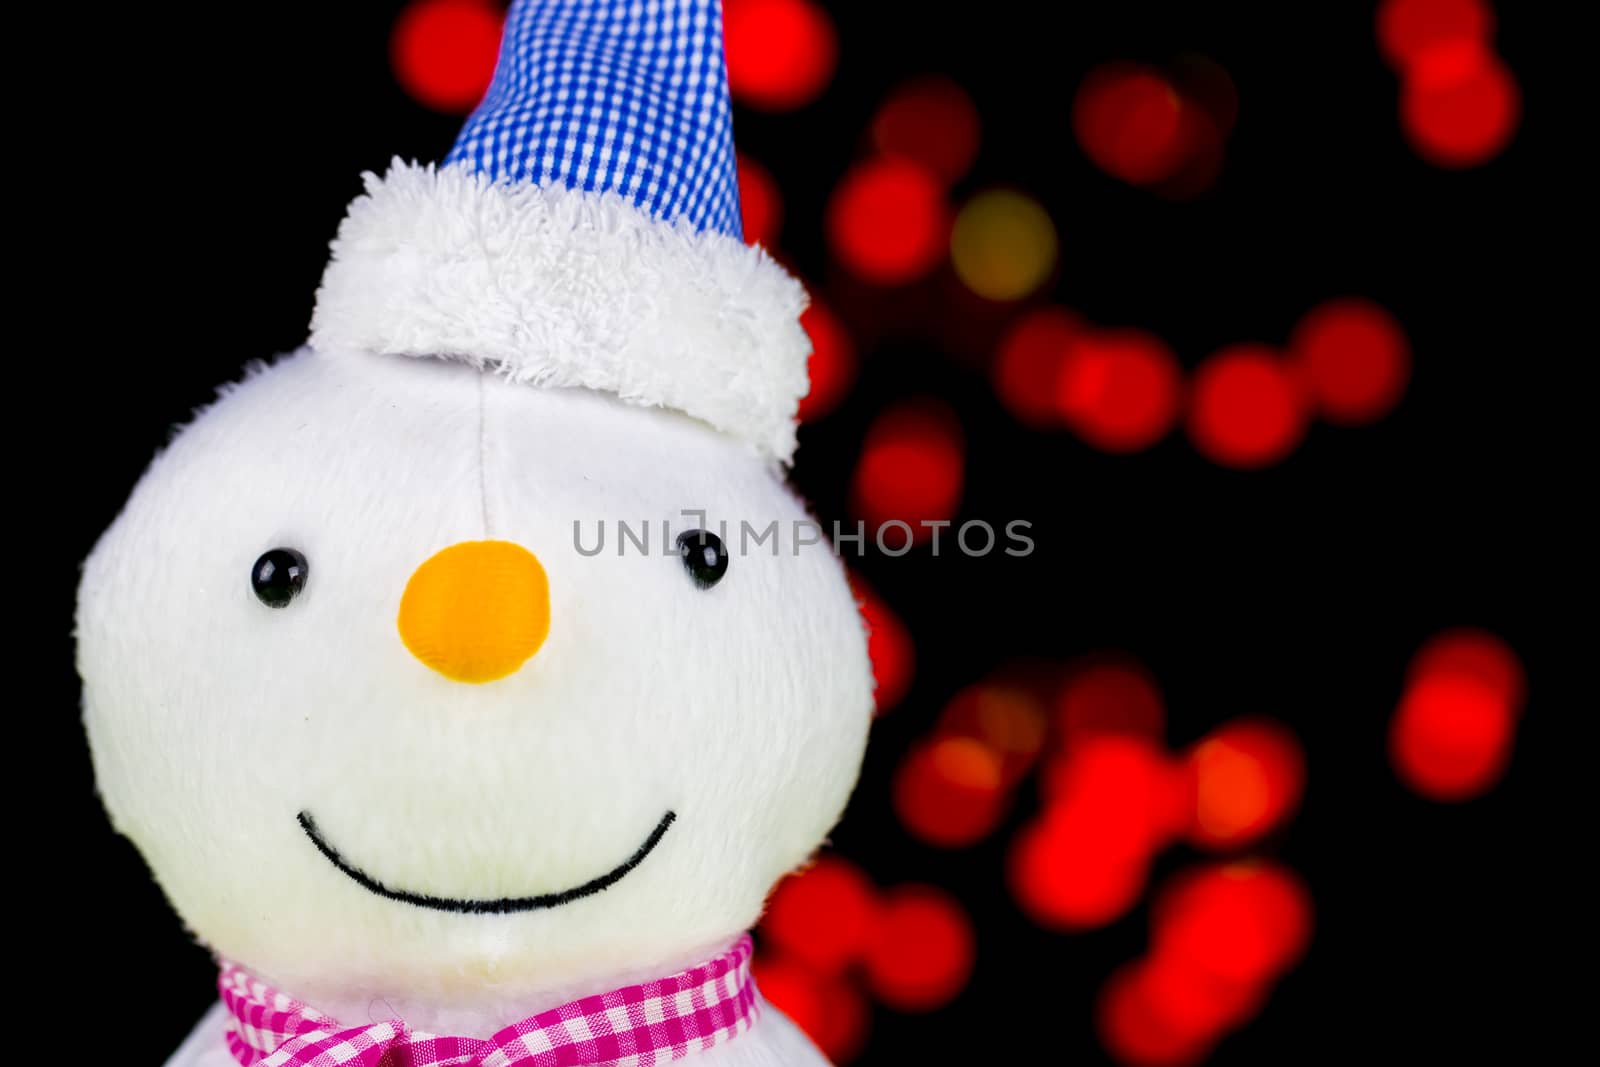 Snowman on a wooden green and red blurred light